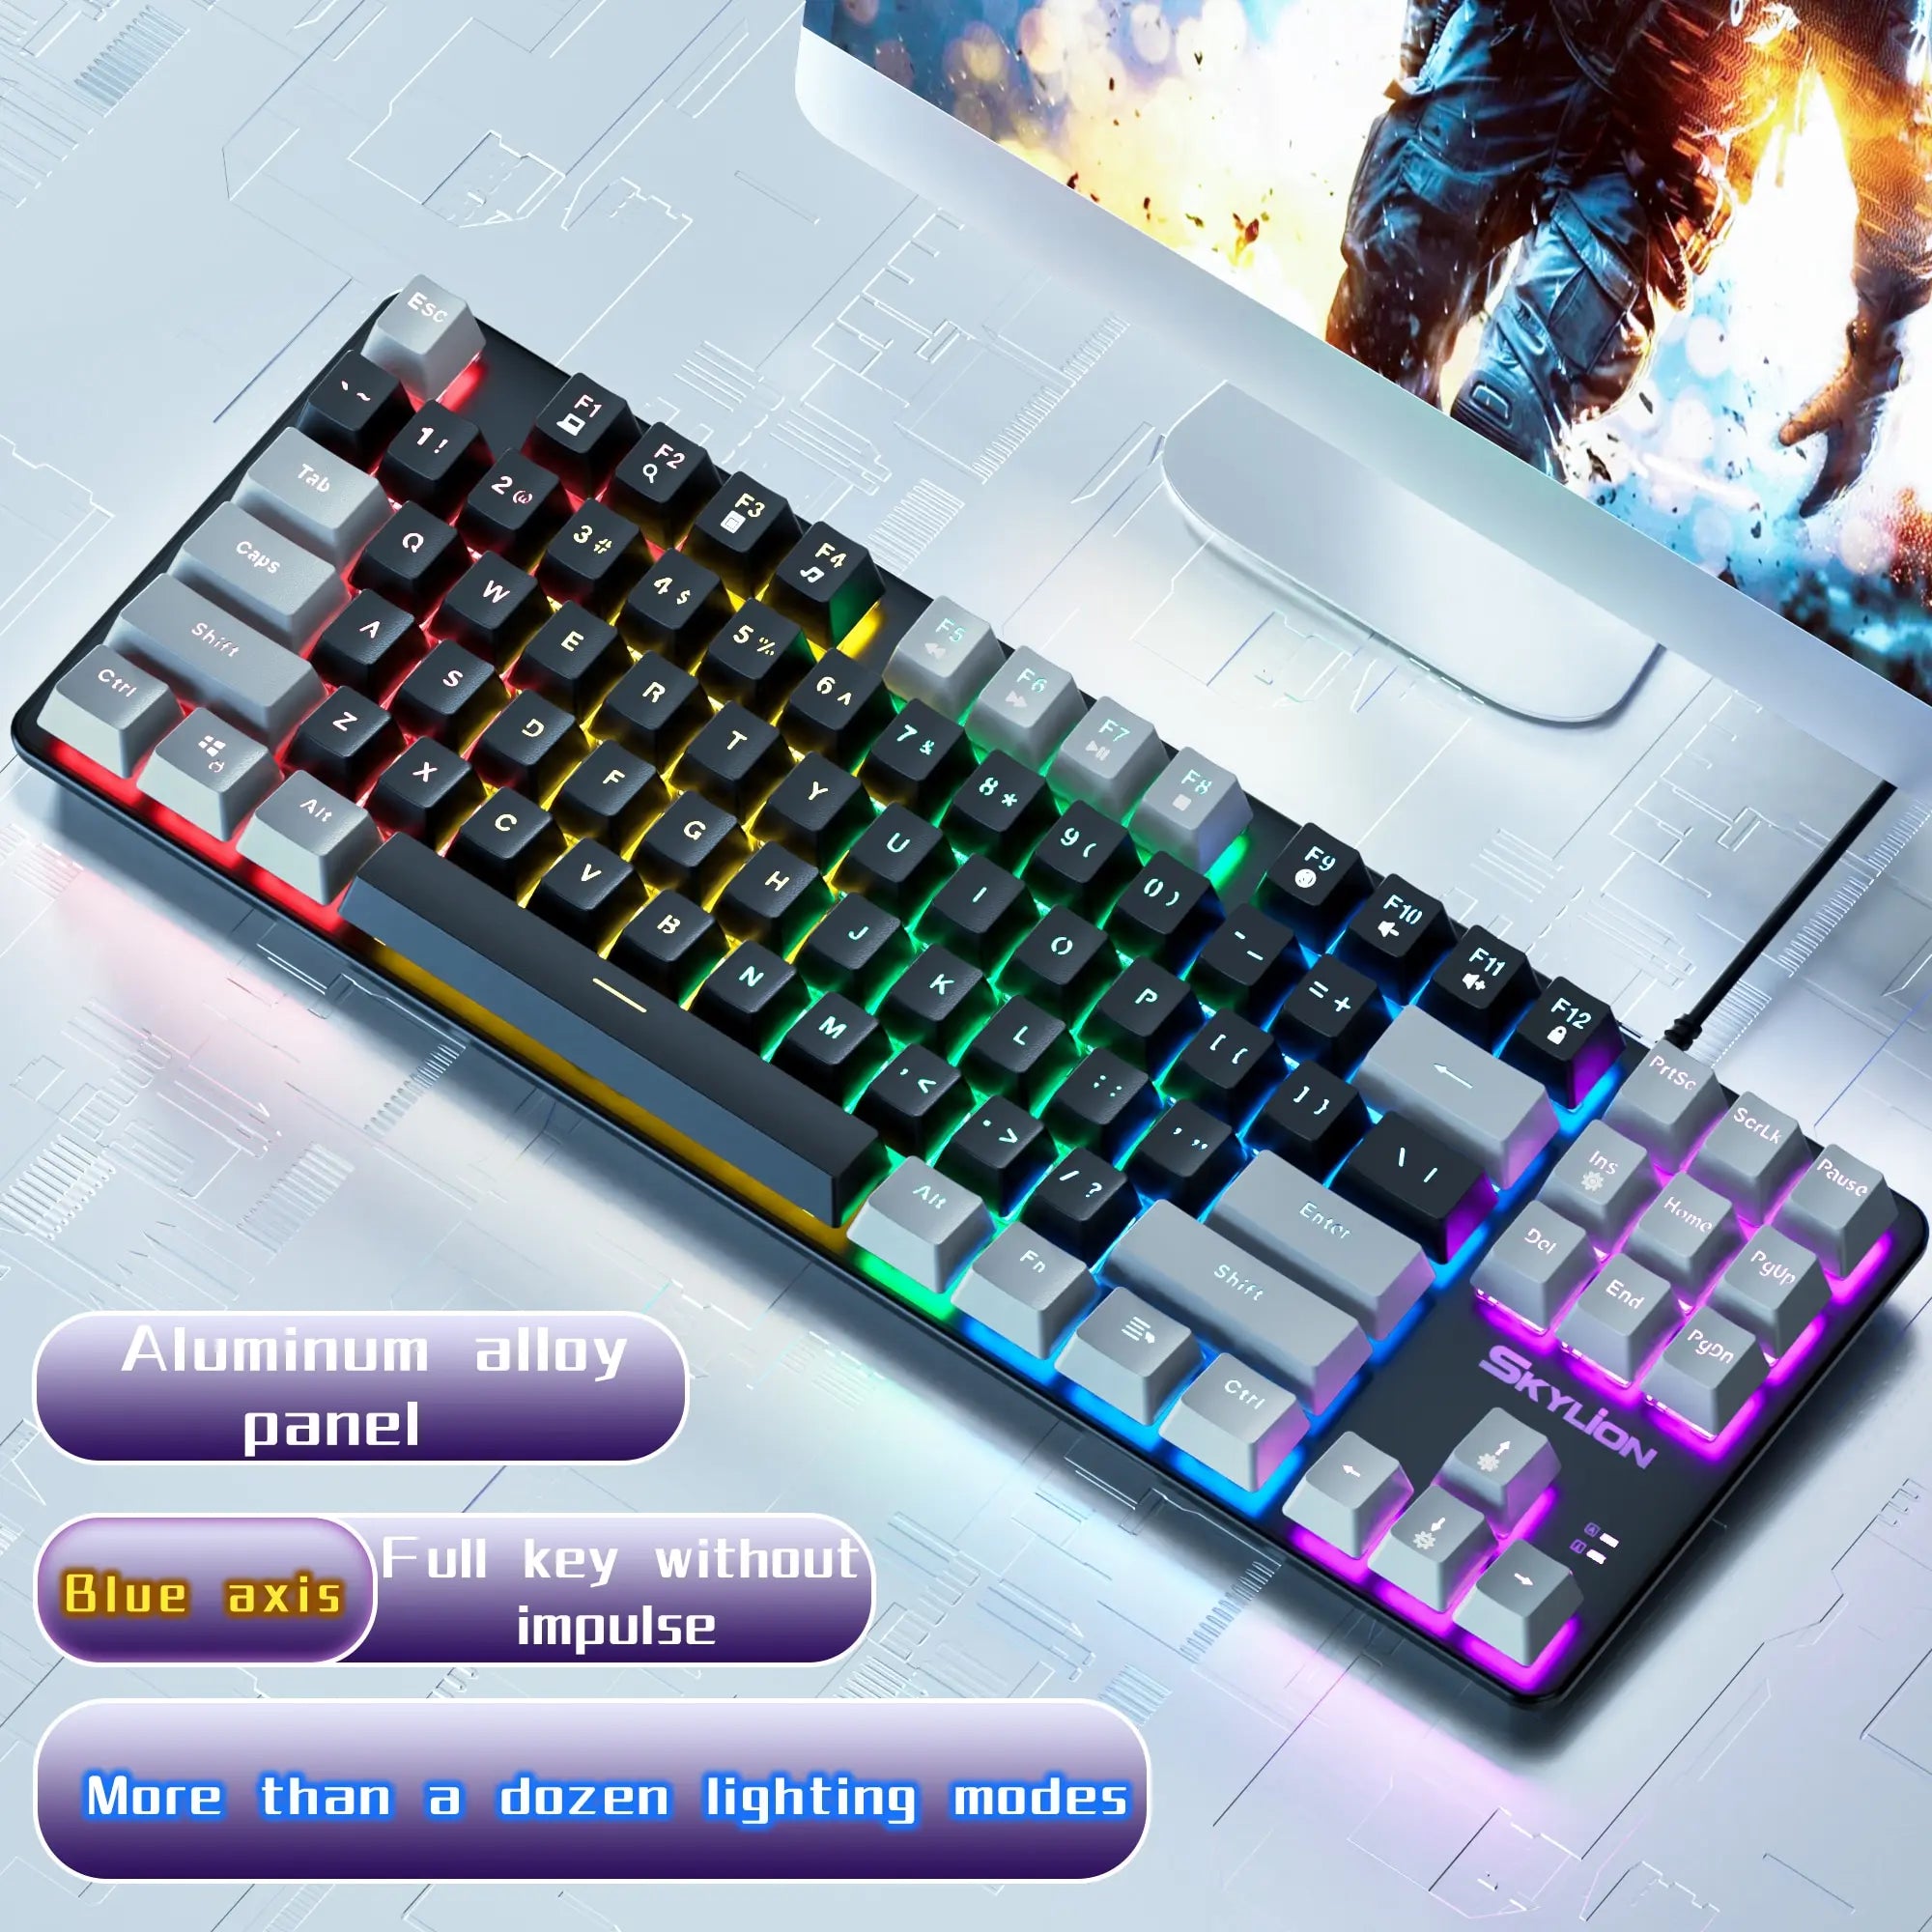 SKYLION H87 Wired Mechanical Keyboard: 10 Colorful Lighting Modes for Gaming & Office | Compatible with Windows & iOS Green Shaft / black-grey